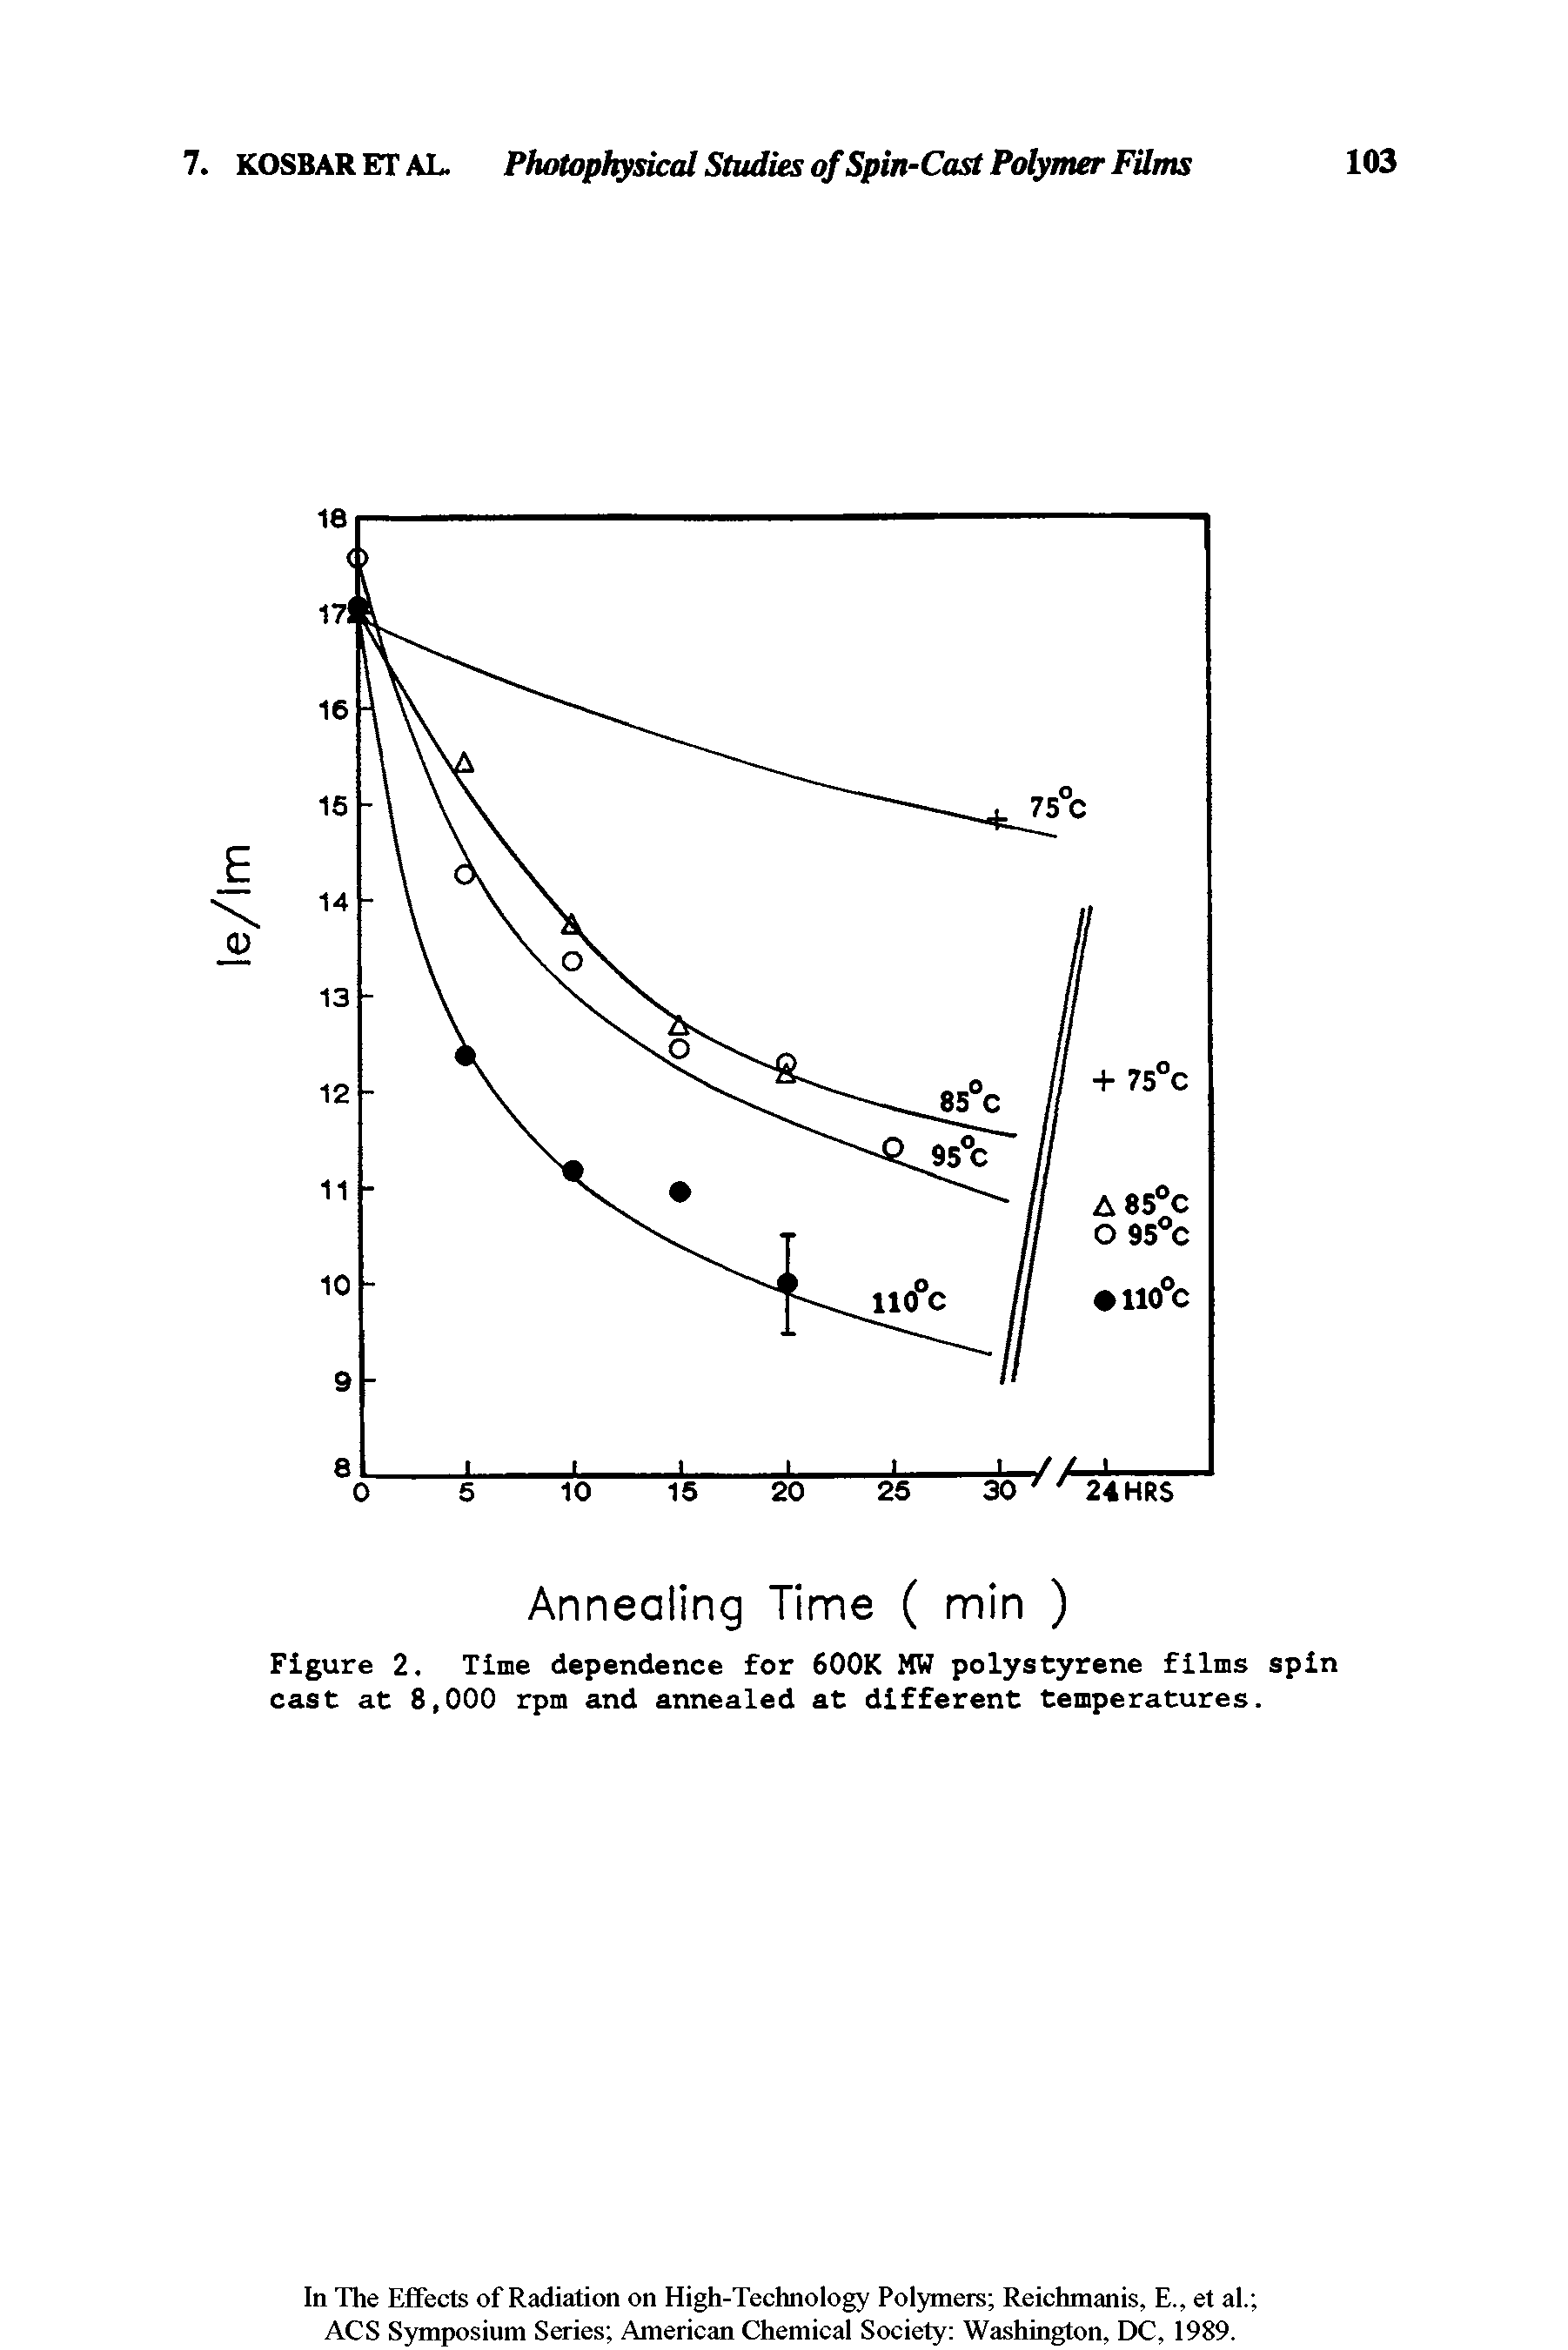 Figure 2. Time dependence for 600K MW polystyrene films spin cast at 8,000 rpm and annealed at different temperatures.